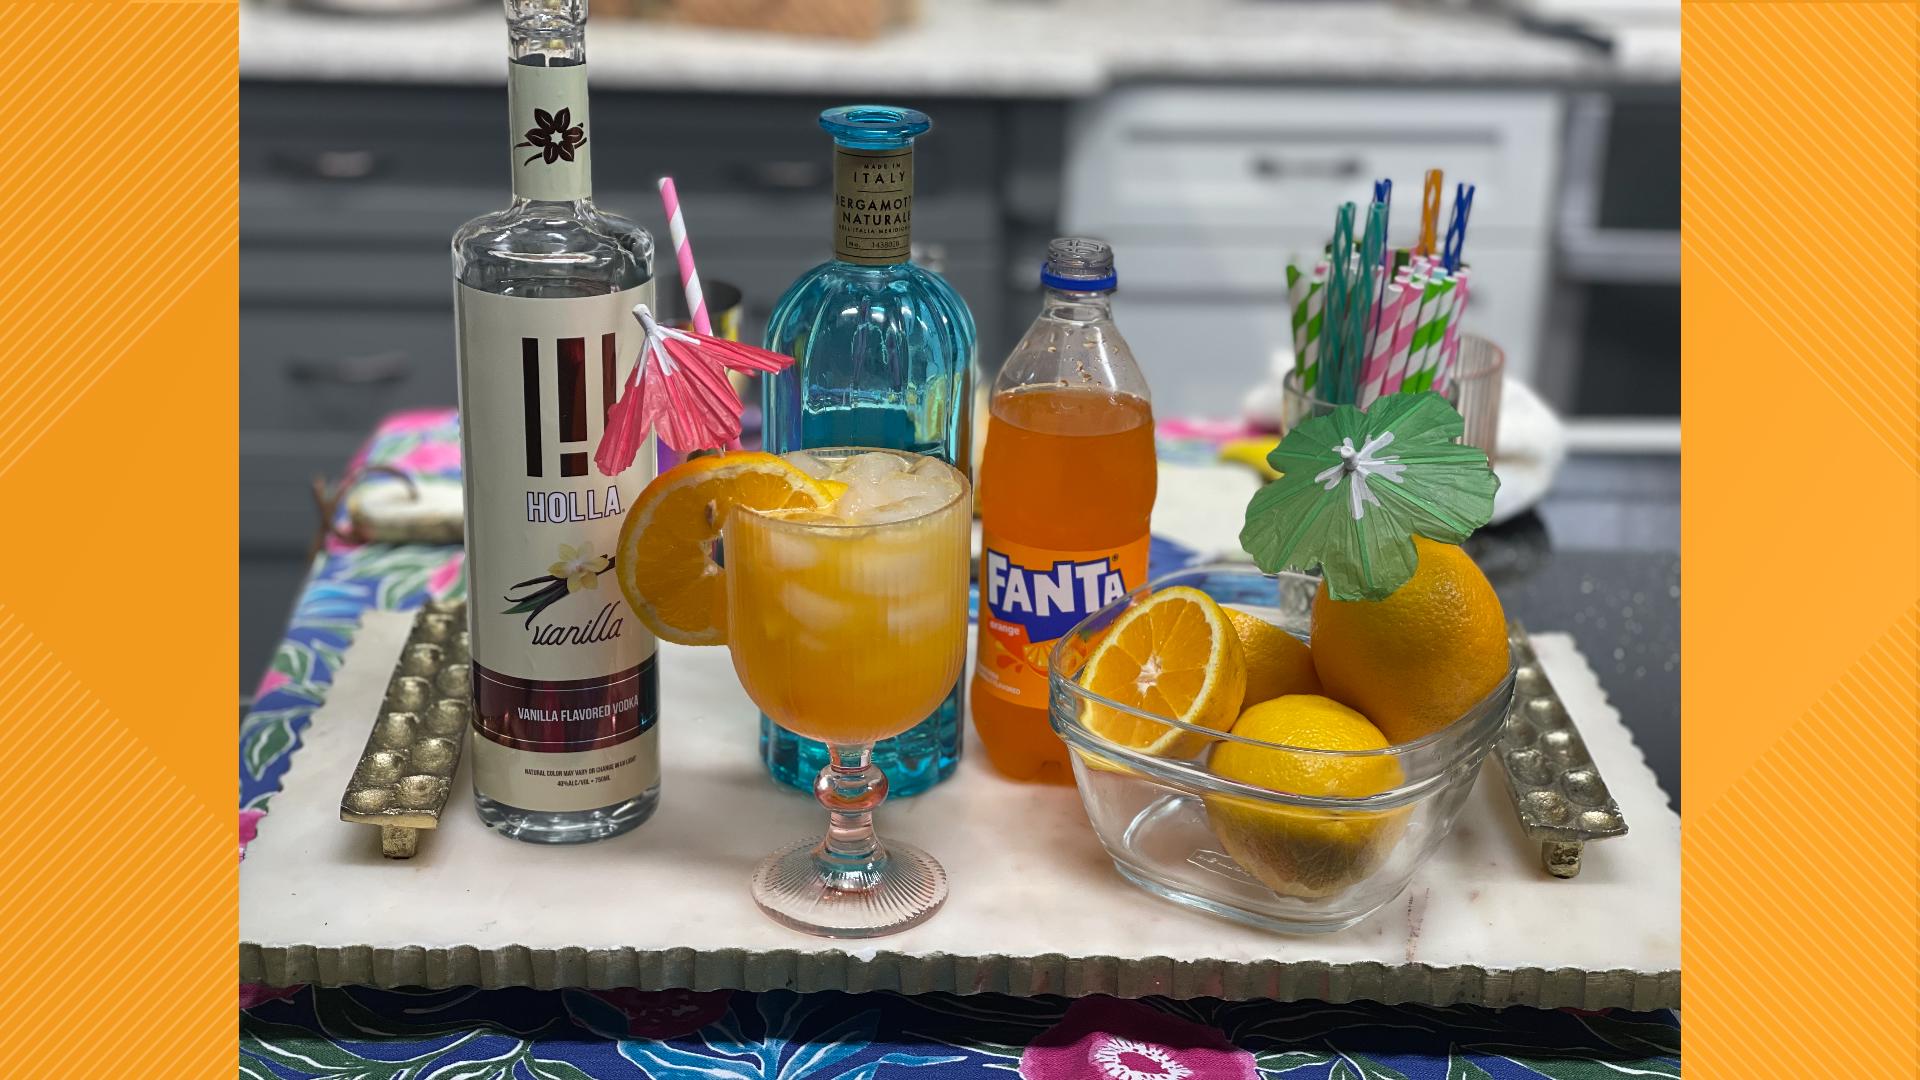 A refreshing Creamsicle Crush cocktail soothes your taste buds and counteracts the spice of Olivia's Jamaican Style Pineapple Shrimp Po’boy.